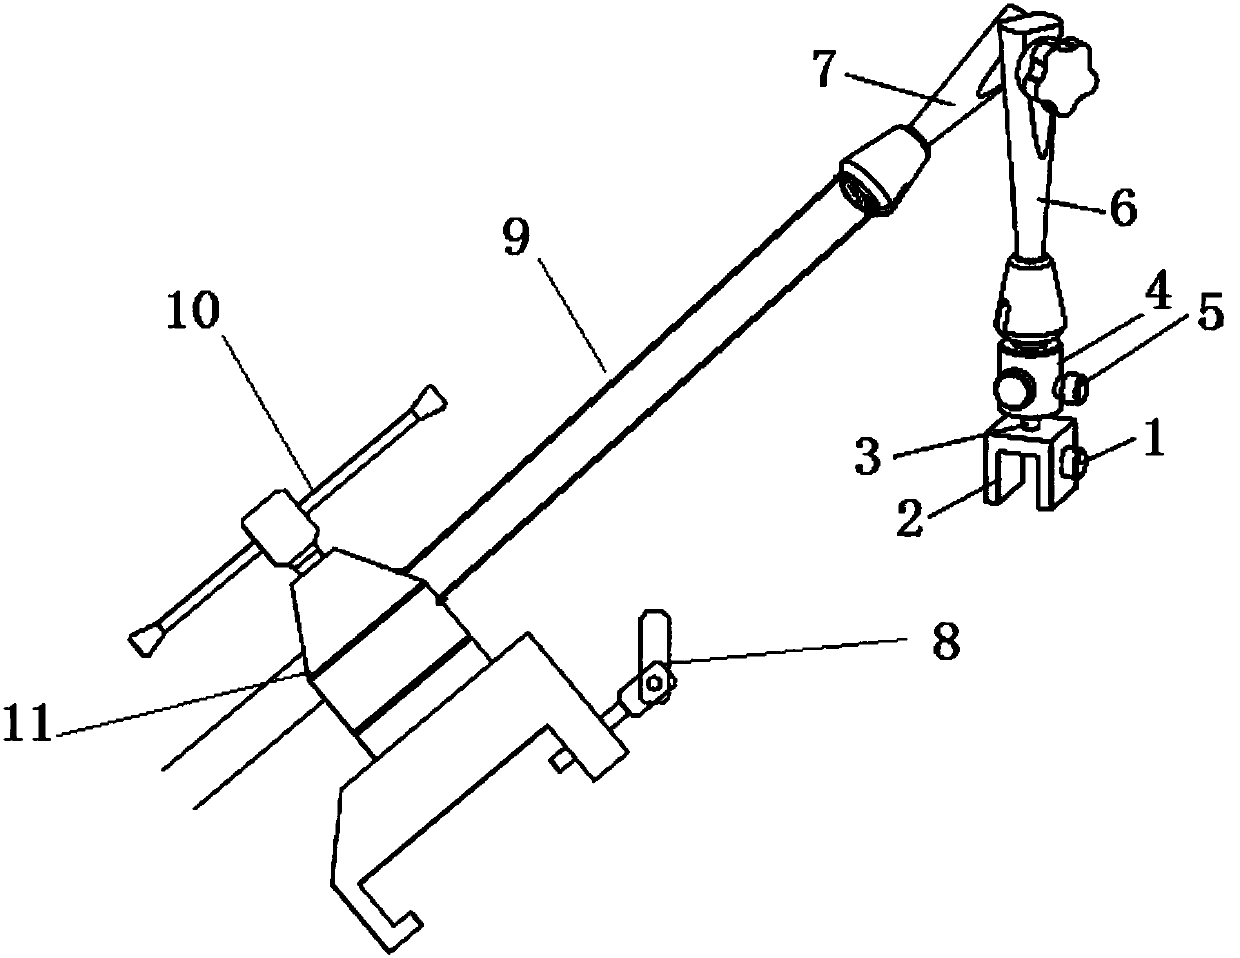 Hydraulic thoracoscope and laparoscope fixing support